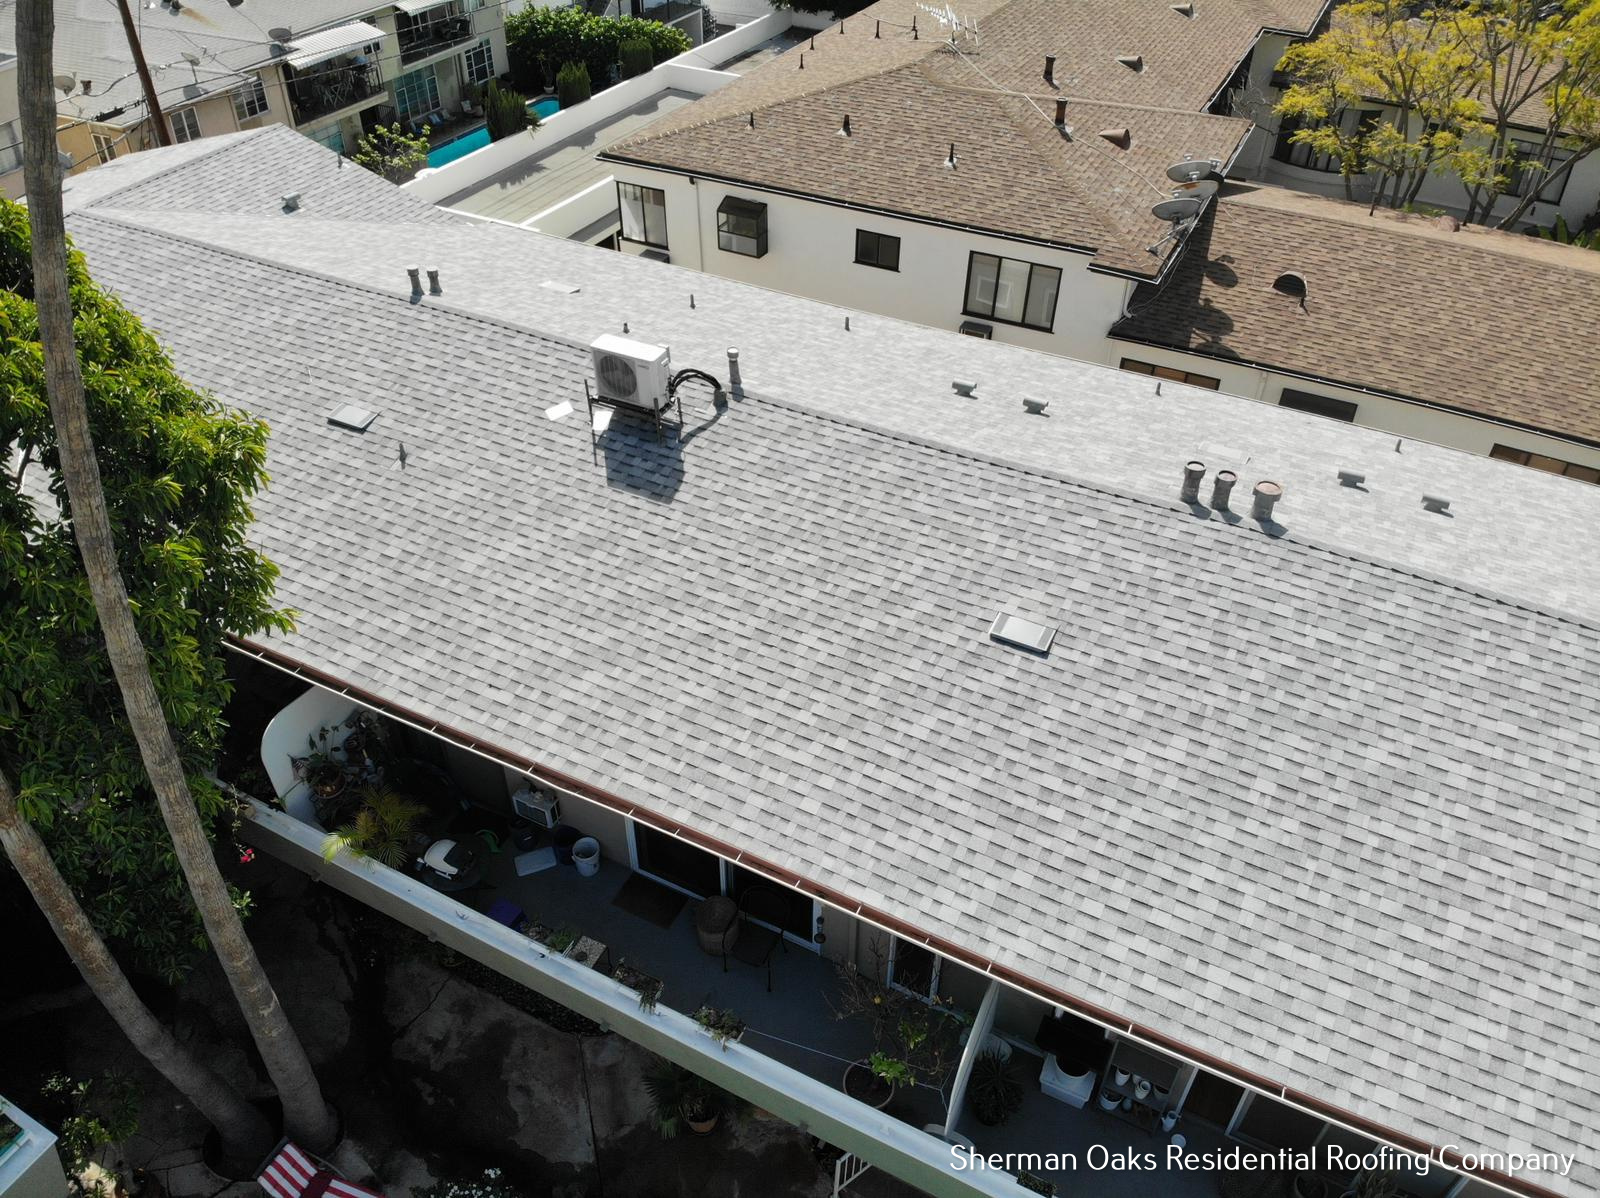 Premium Roofing Services in Sherman Oaks, CA